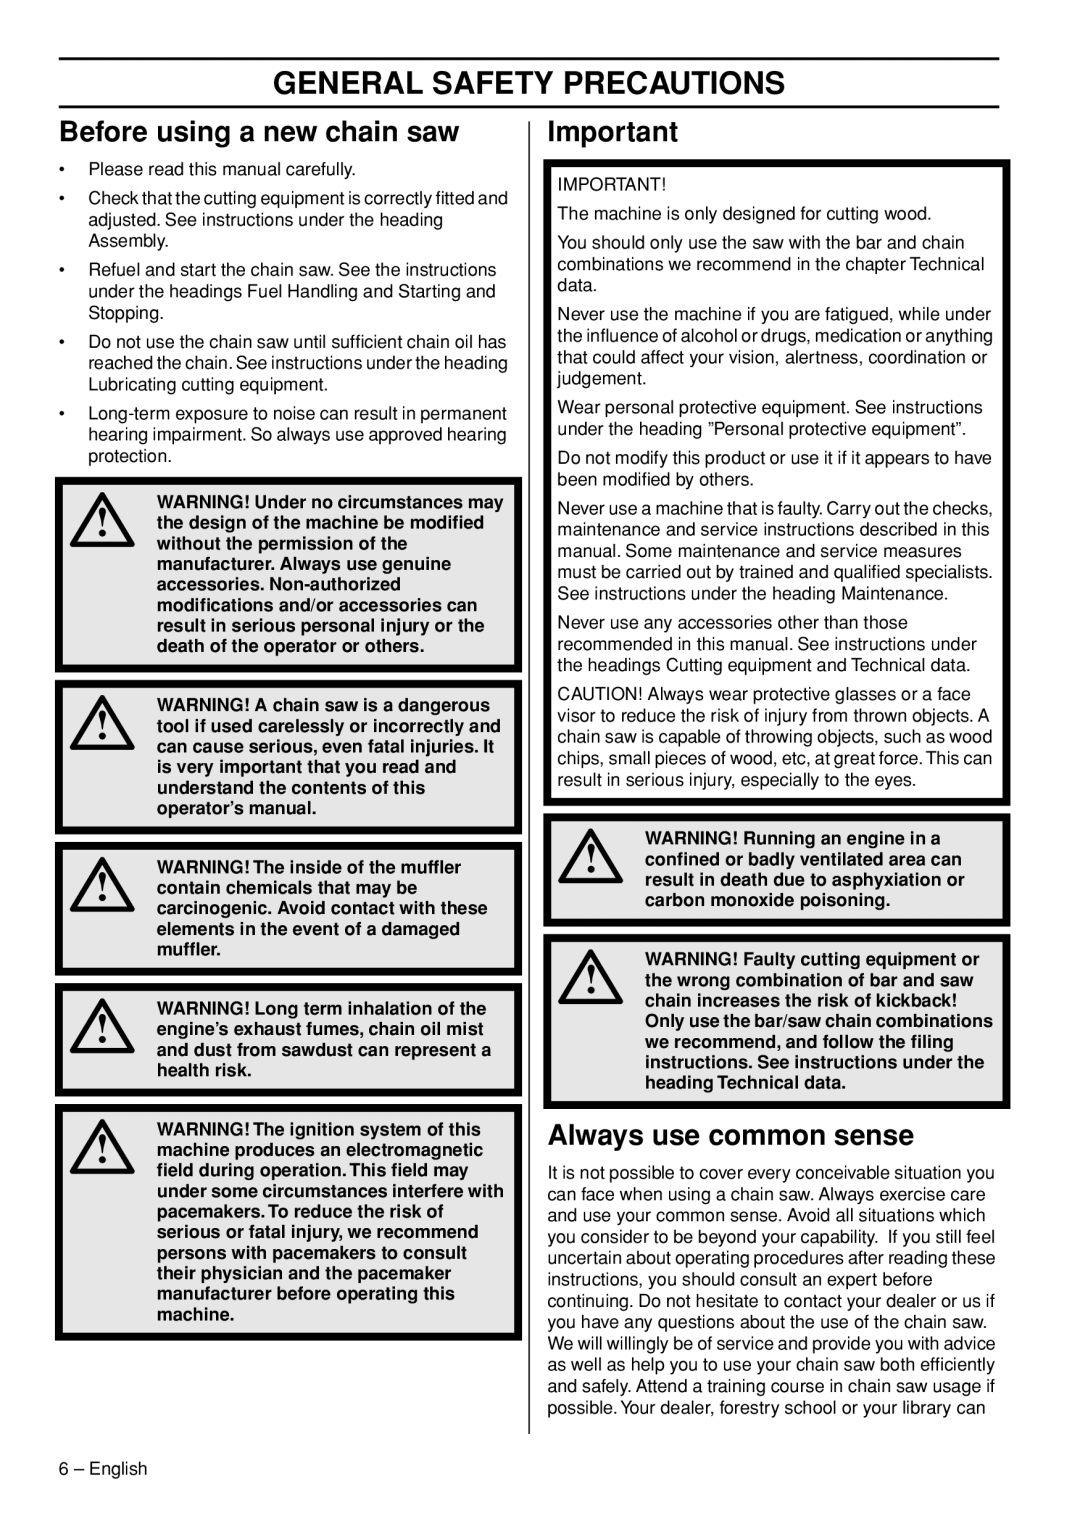 Husqvarna T435 manual General Safety Precautions, Before using a new chain saw, Always use common sense 